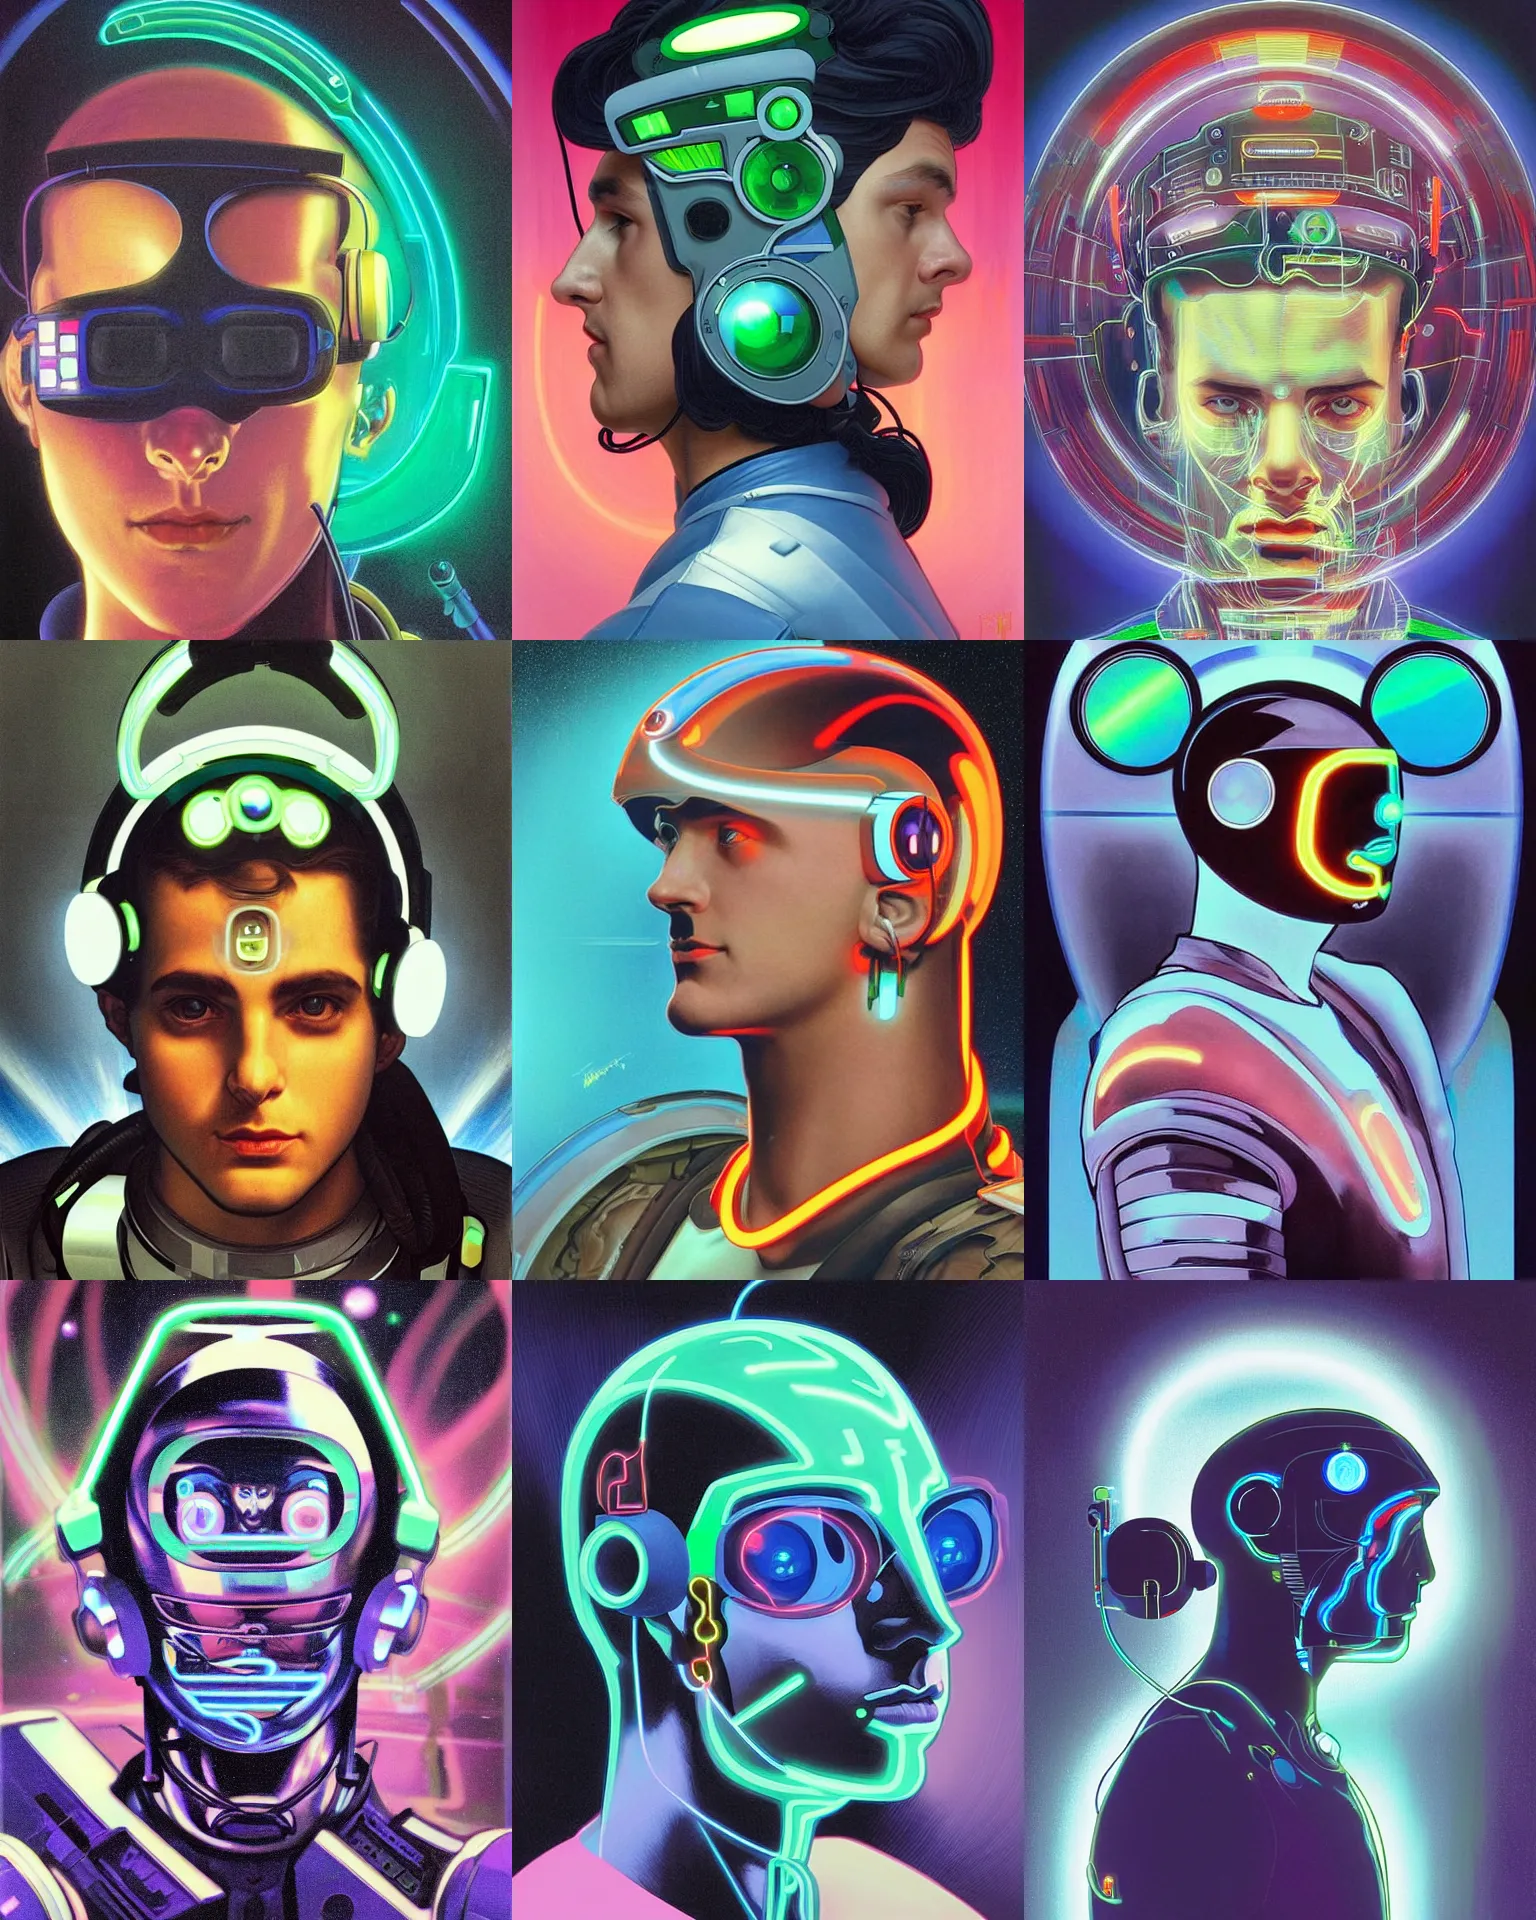 Prompt: sillouete side view future coder man, sleek cyclops display over eyes and glowing headset, neon accents, holographic colors, desaturated headshot portrait digital painting by herbert bayer, alphonse mucha, donato giancola, john berkey, dean cornwall, alex grey, tom whalen, astronaut cyberpunk electric lights profile